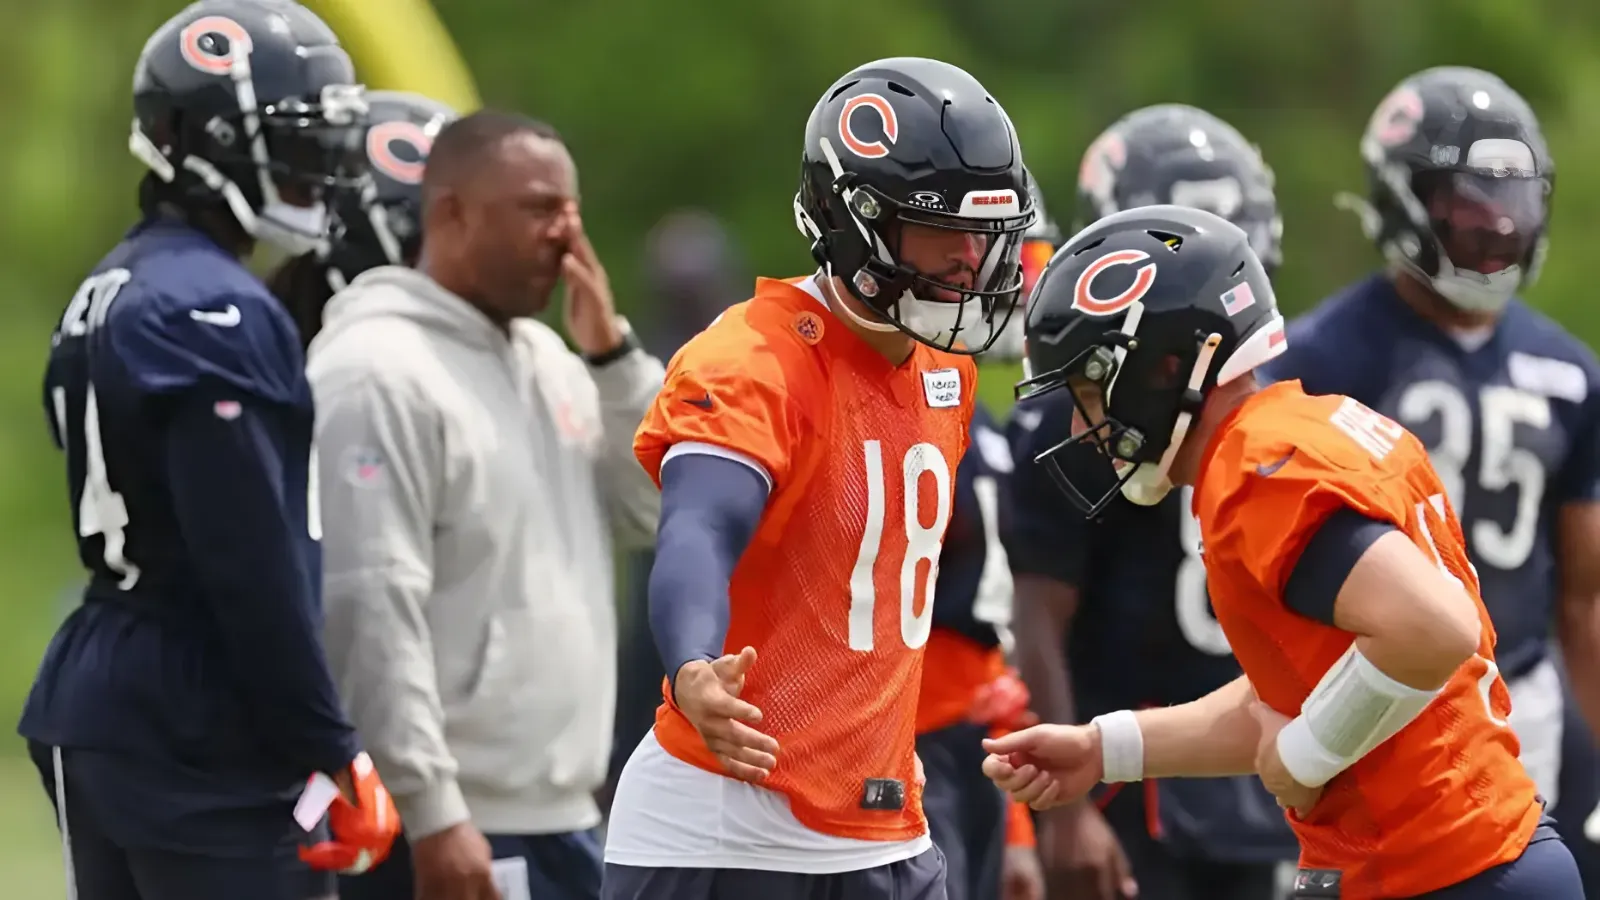 Bears, Packers' wildly different offensive team-building approaches shaped by their QBs